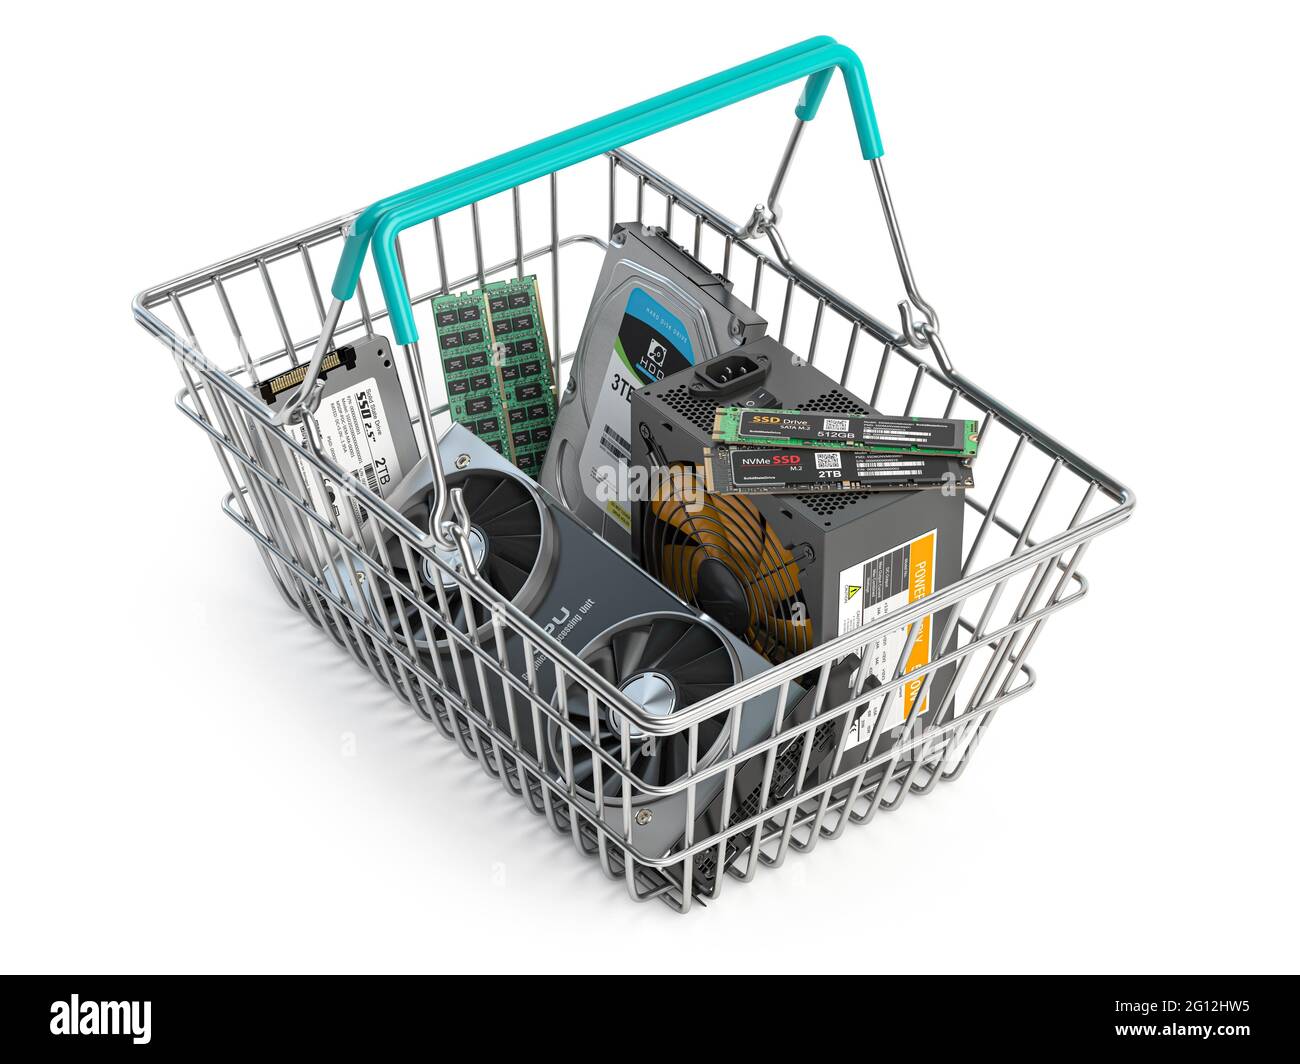 Computer hardware shopping basket. Buying pc computer parts online concept. 3d illustration. Stock Photo